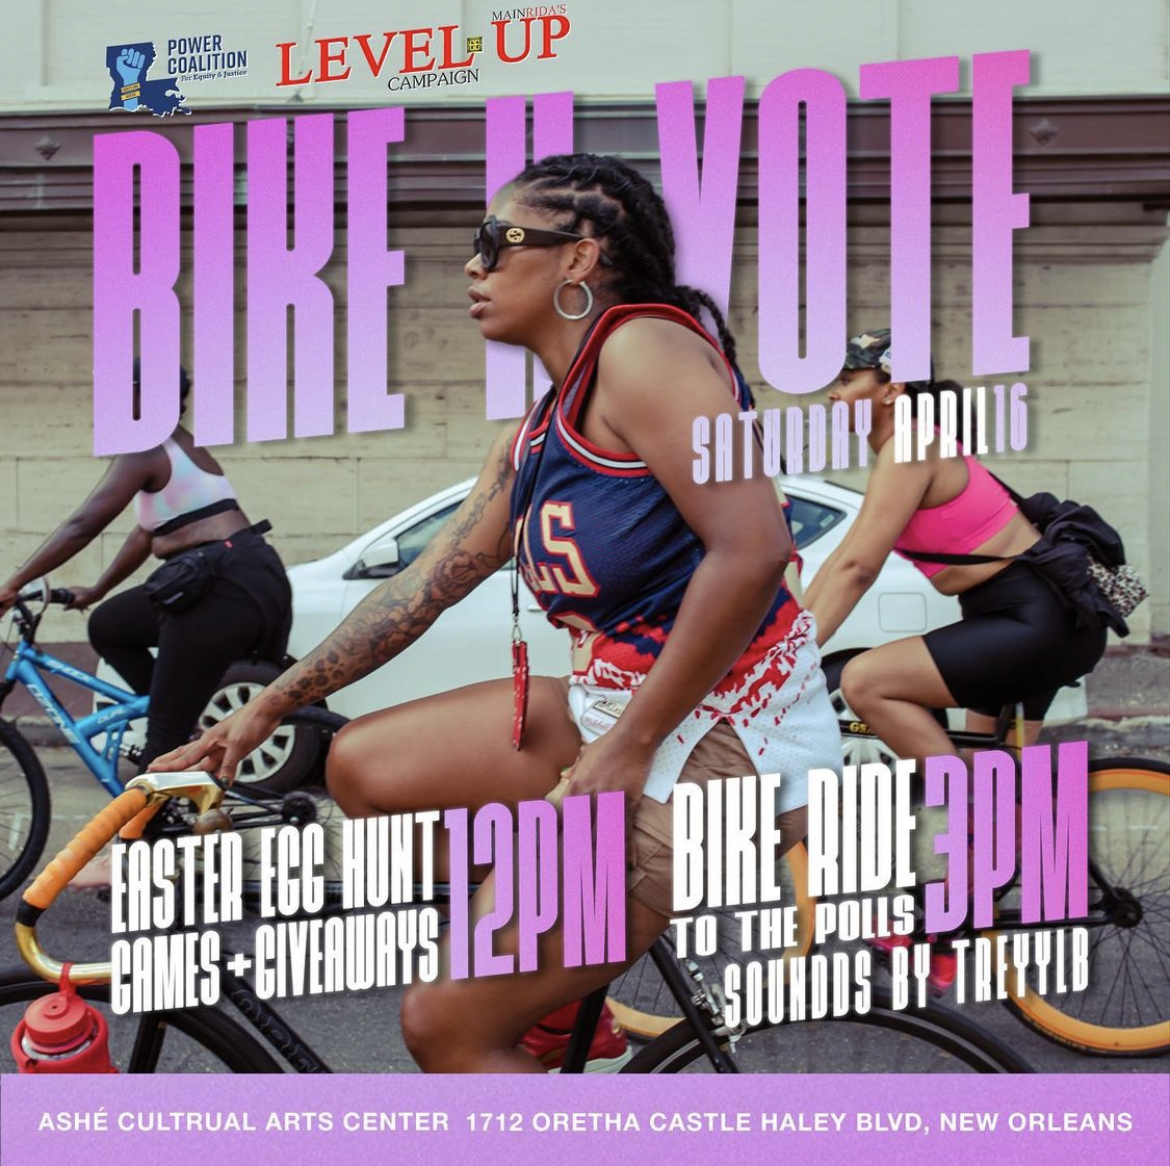 Power Coalition partners with Bike-N-Vote and Level Up Campaign to engage young voters in Early Voting